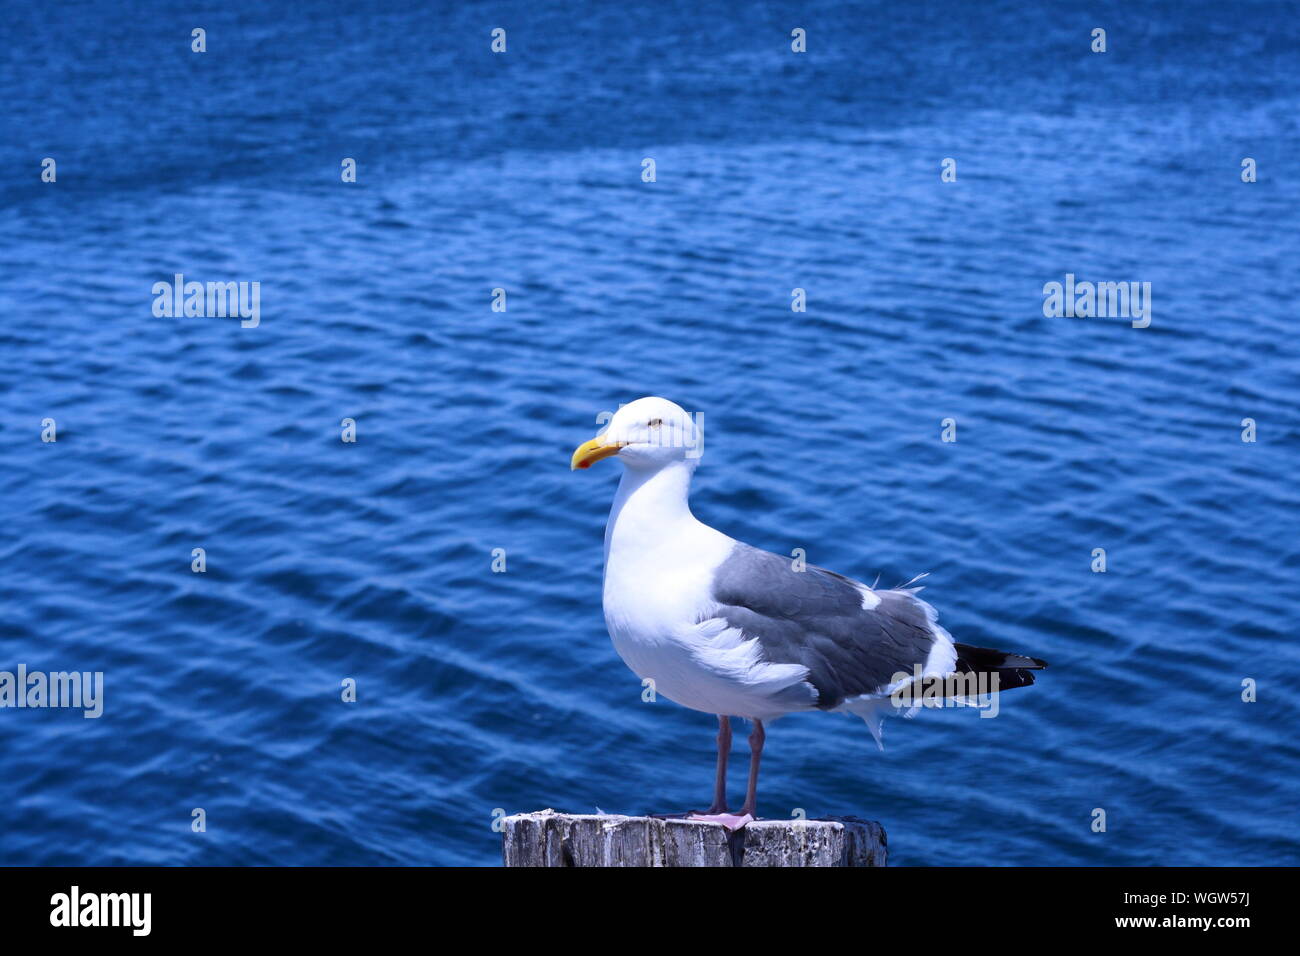 Seagull Perching On Wooden Post Against Sea Stock Photo